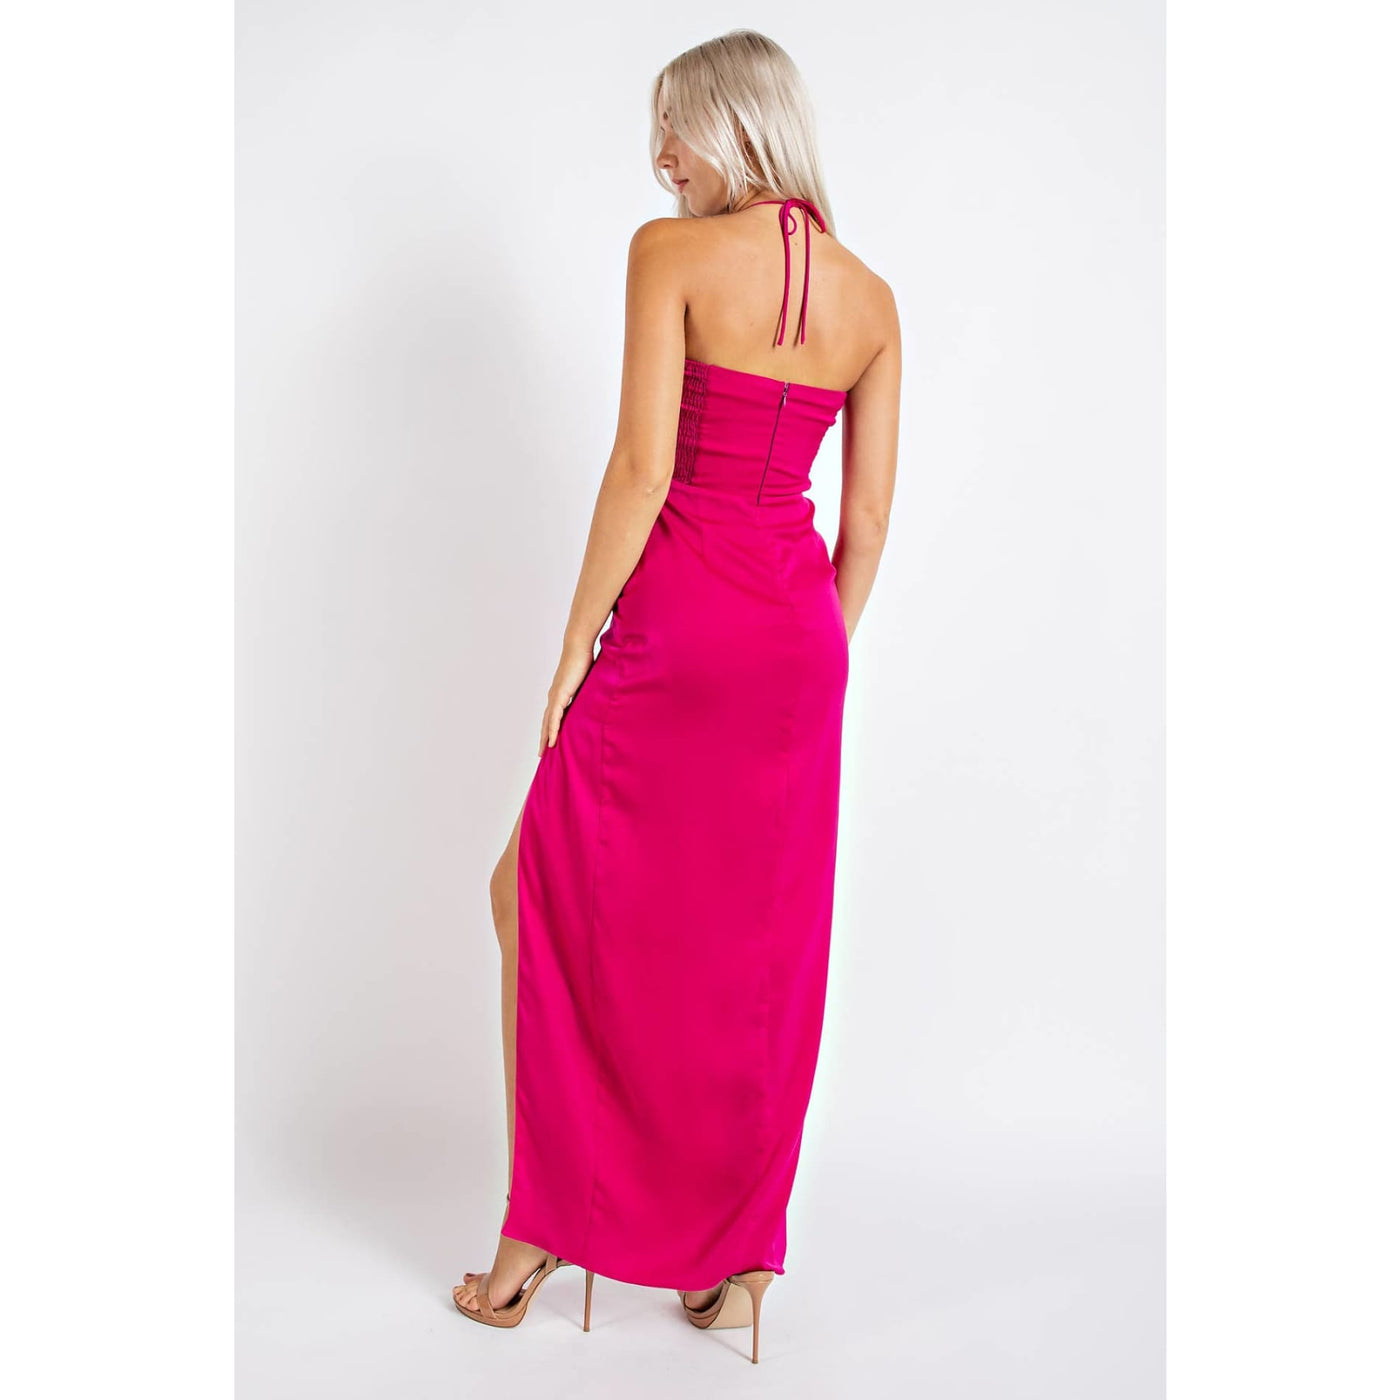 Life Of The Party Maxi Dress - L / Fuchsia - 175 Evening Dresses/Jumpsuits/Rompers